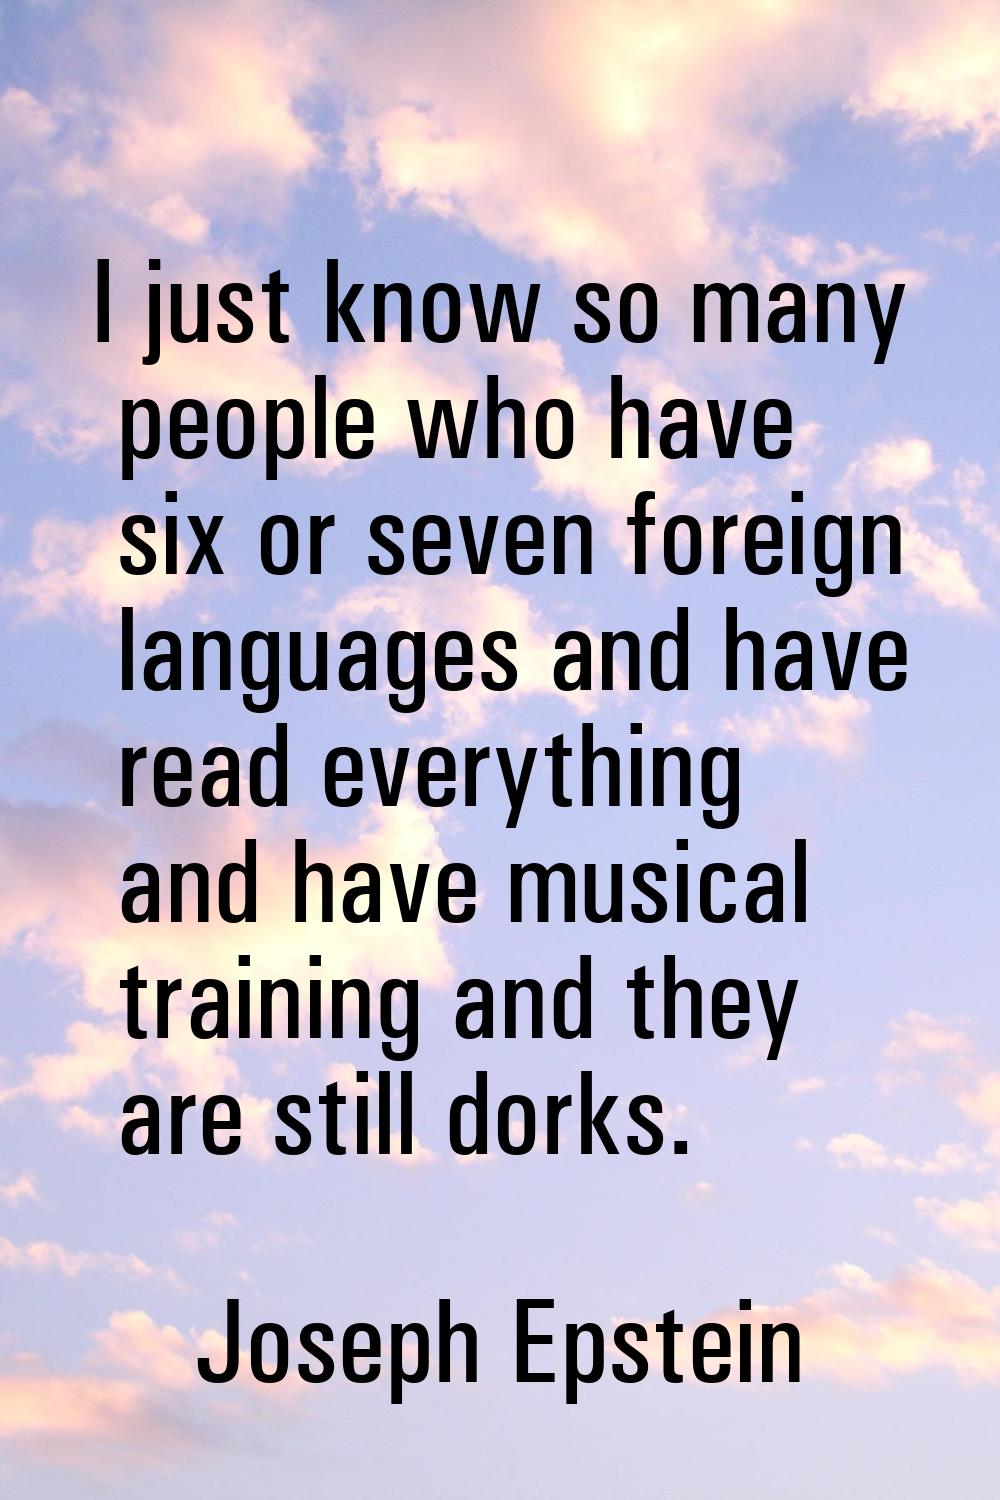 I just know so many people who have six or seven foreign languages and have read everything and hav